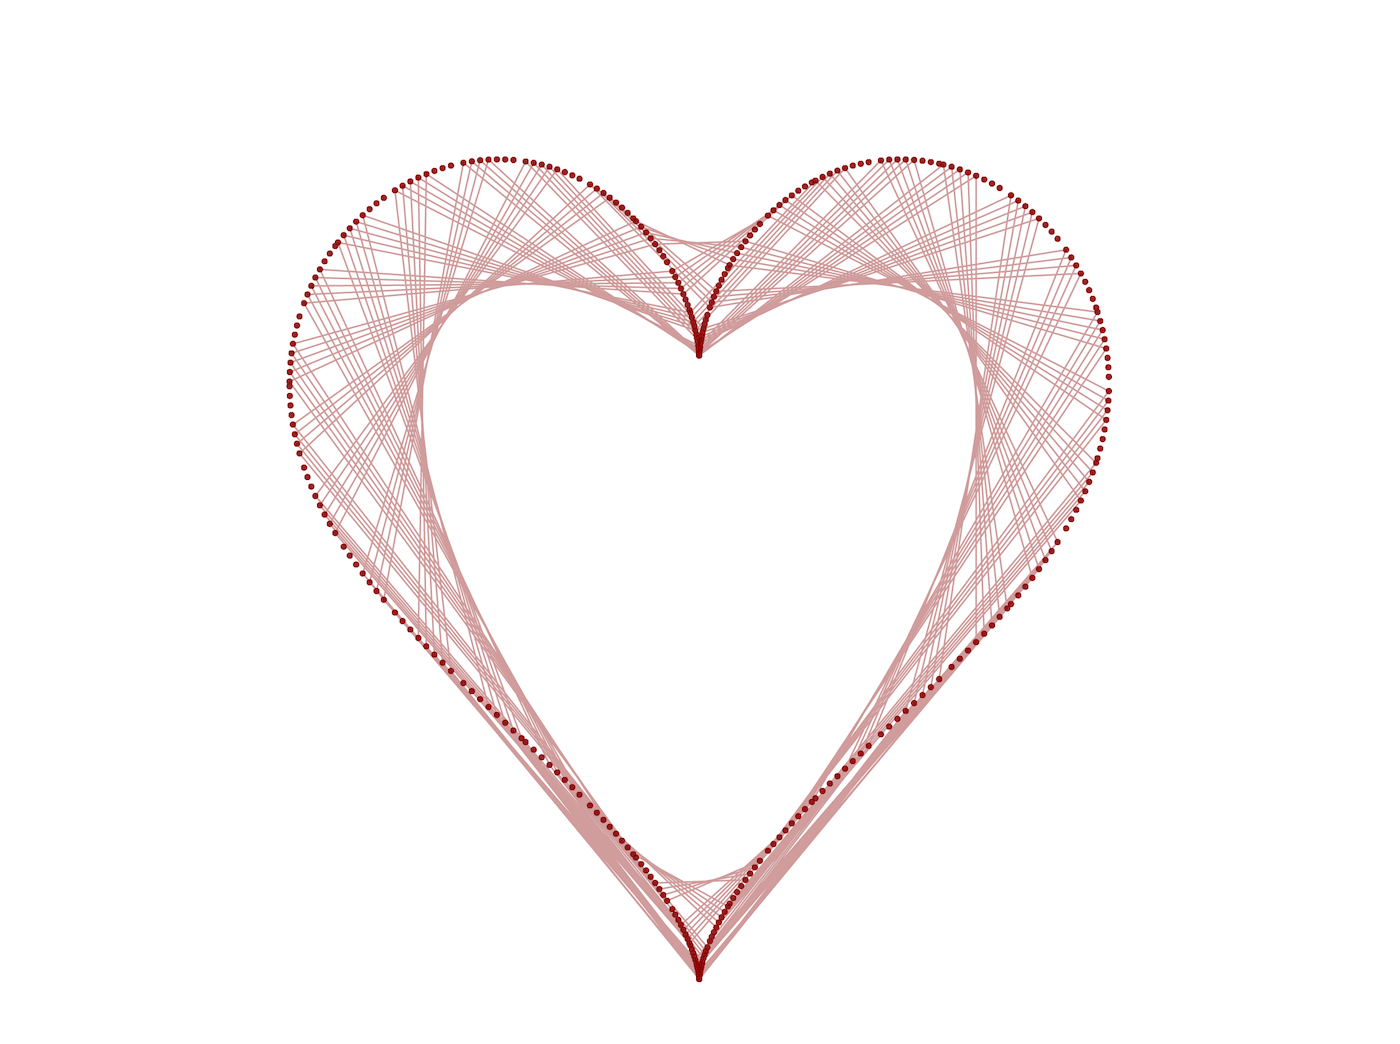 Animating a heart shaped curve with d3.js